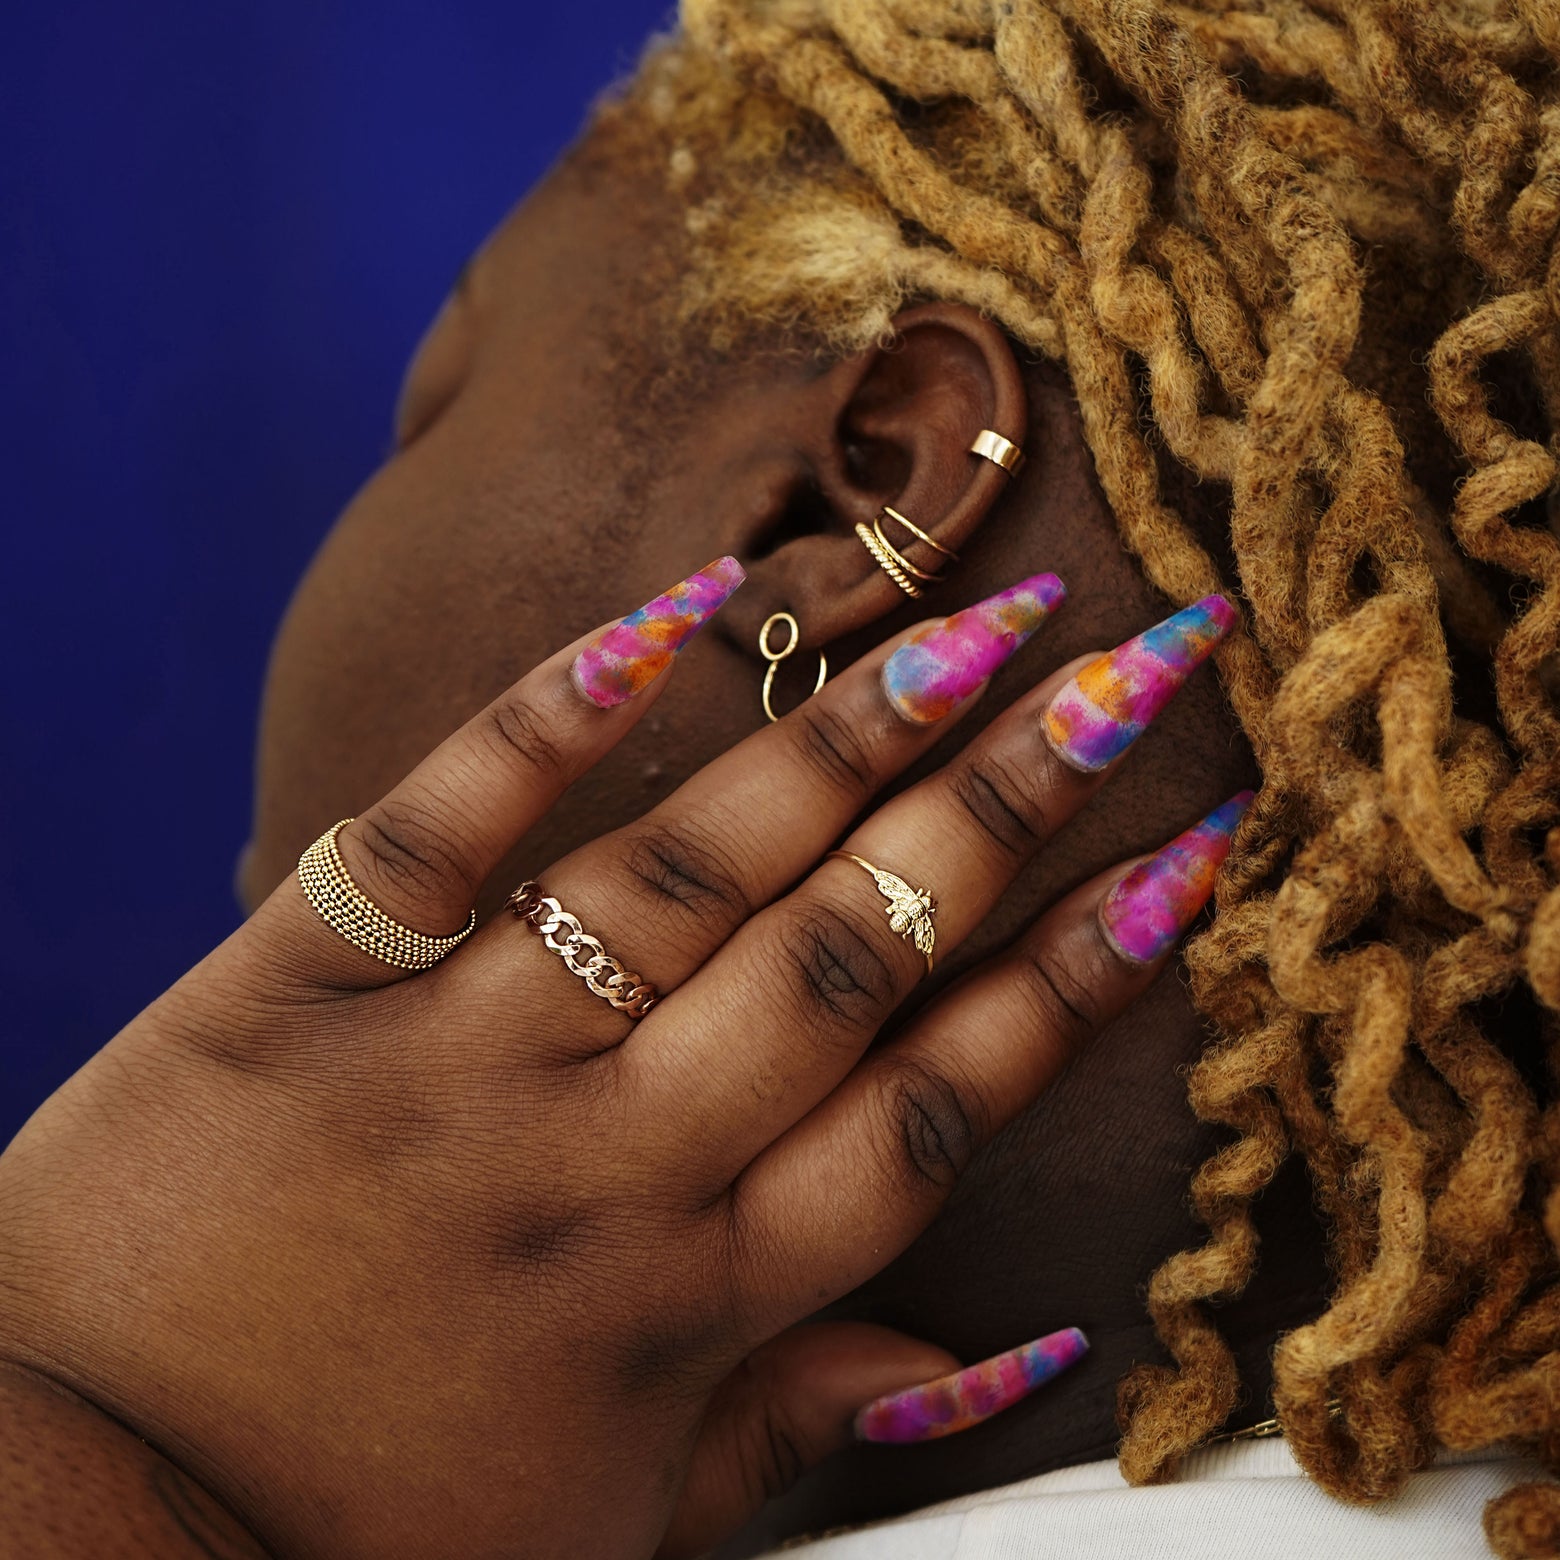 A model touching behind their ear wearing Automic Gold rings, earrings and ear cuffs